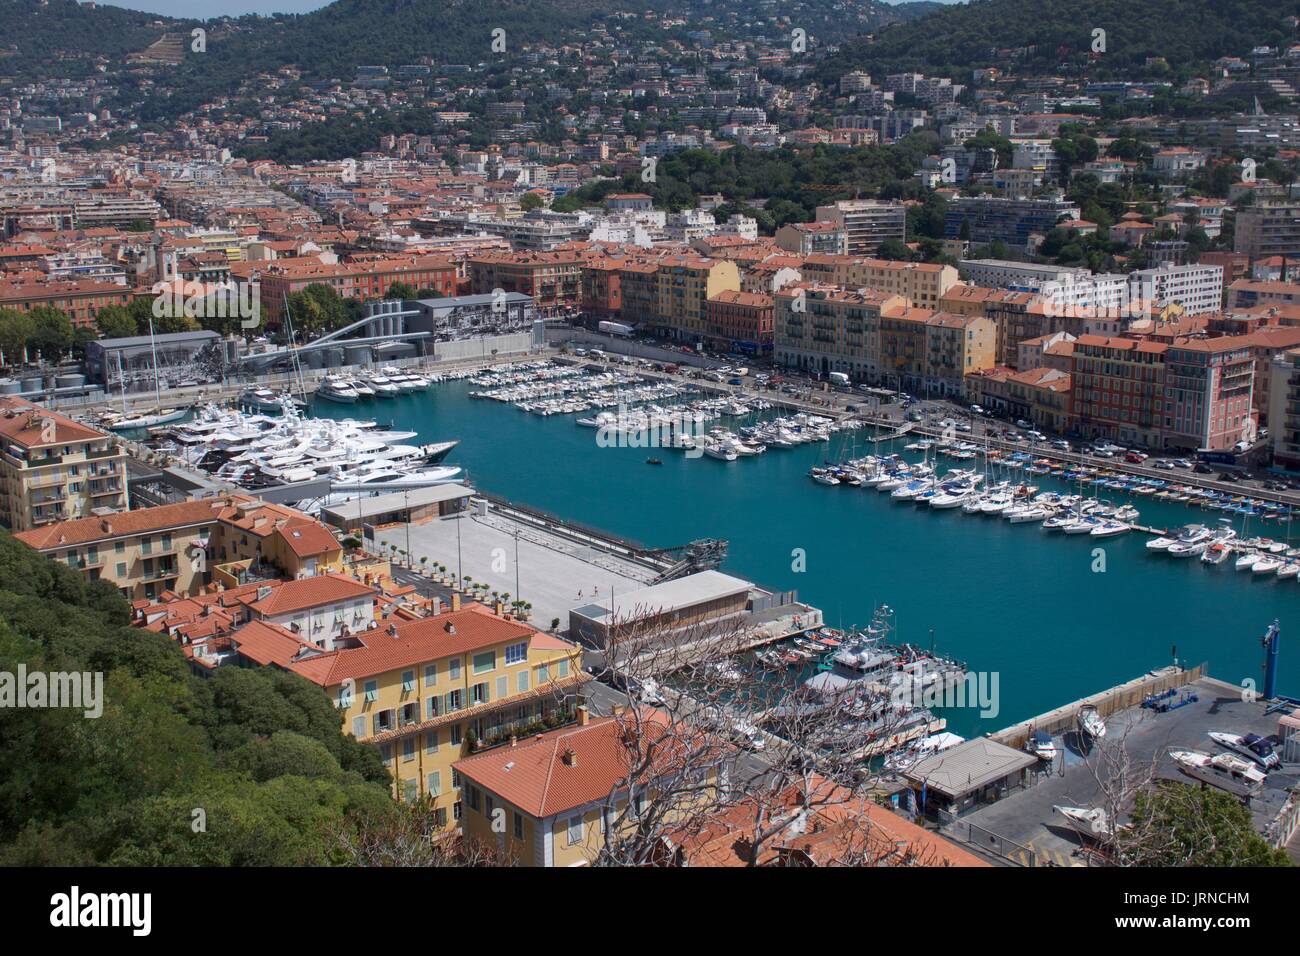 High angle view of waterfront marina with yachts and super yachts, Nice, France Stock Photo